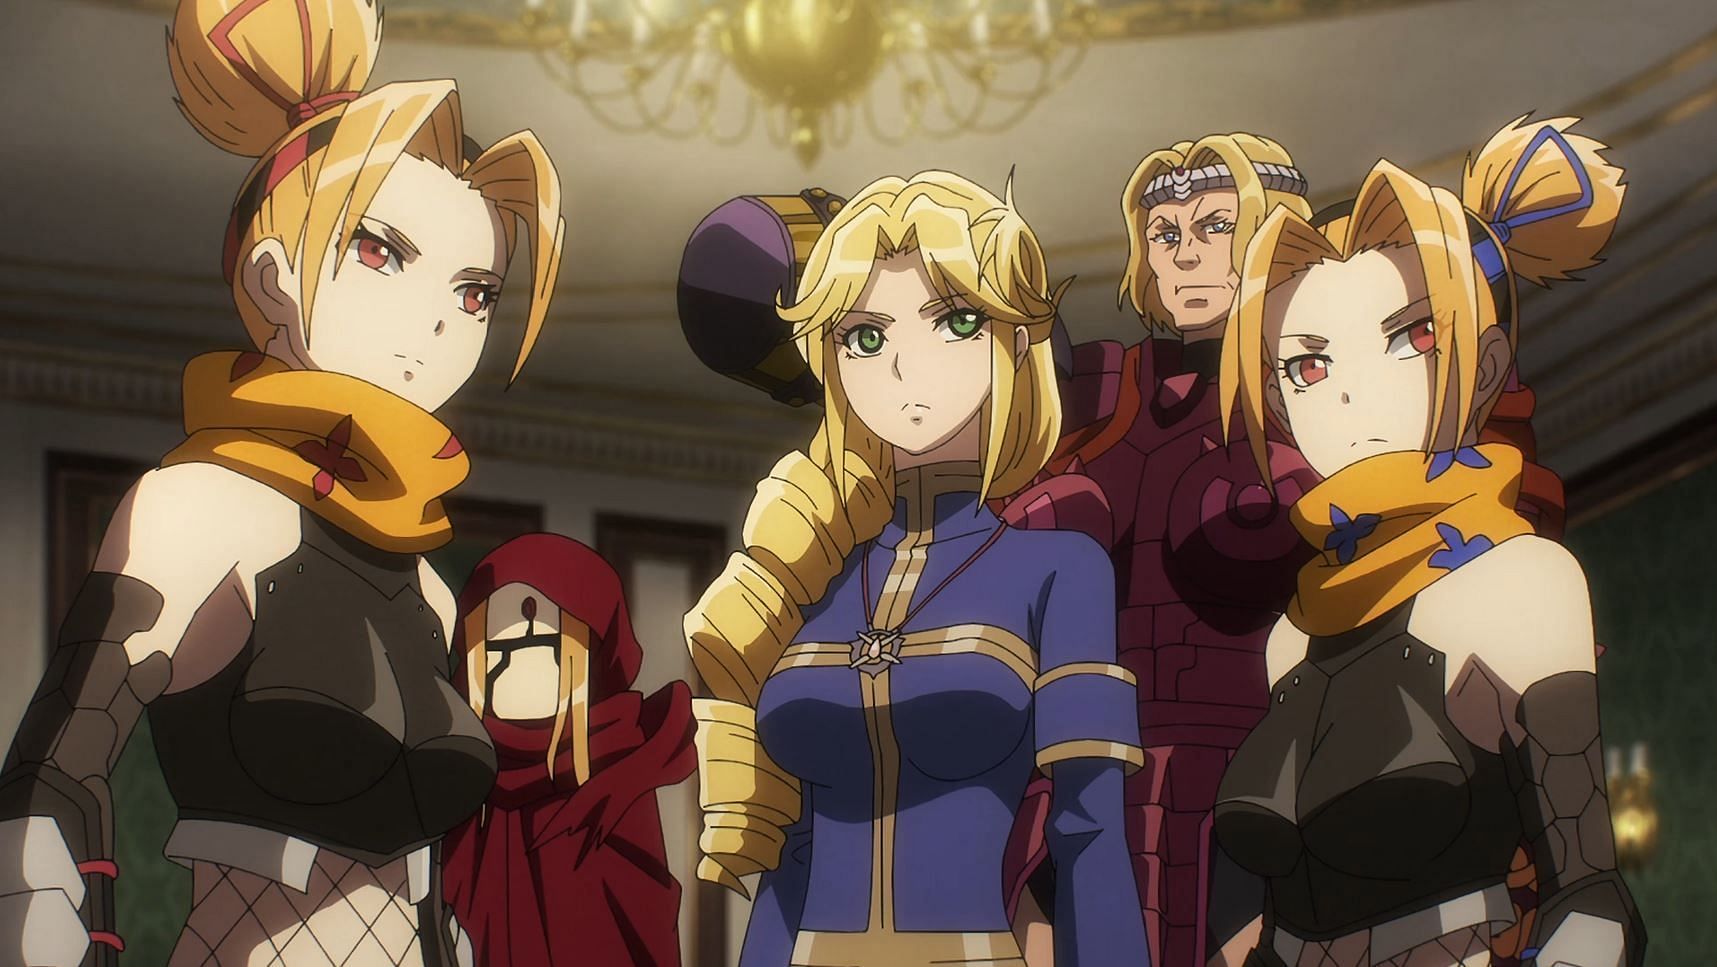 Overlord IV (Season 4) Episode 9 - Anime Review - DoubleSama